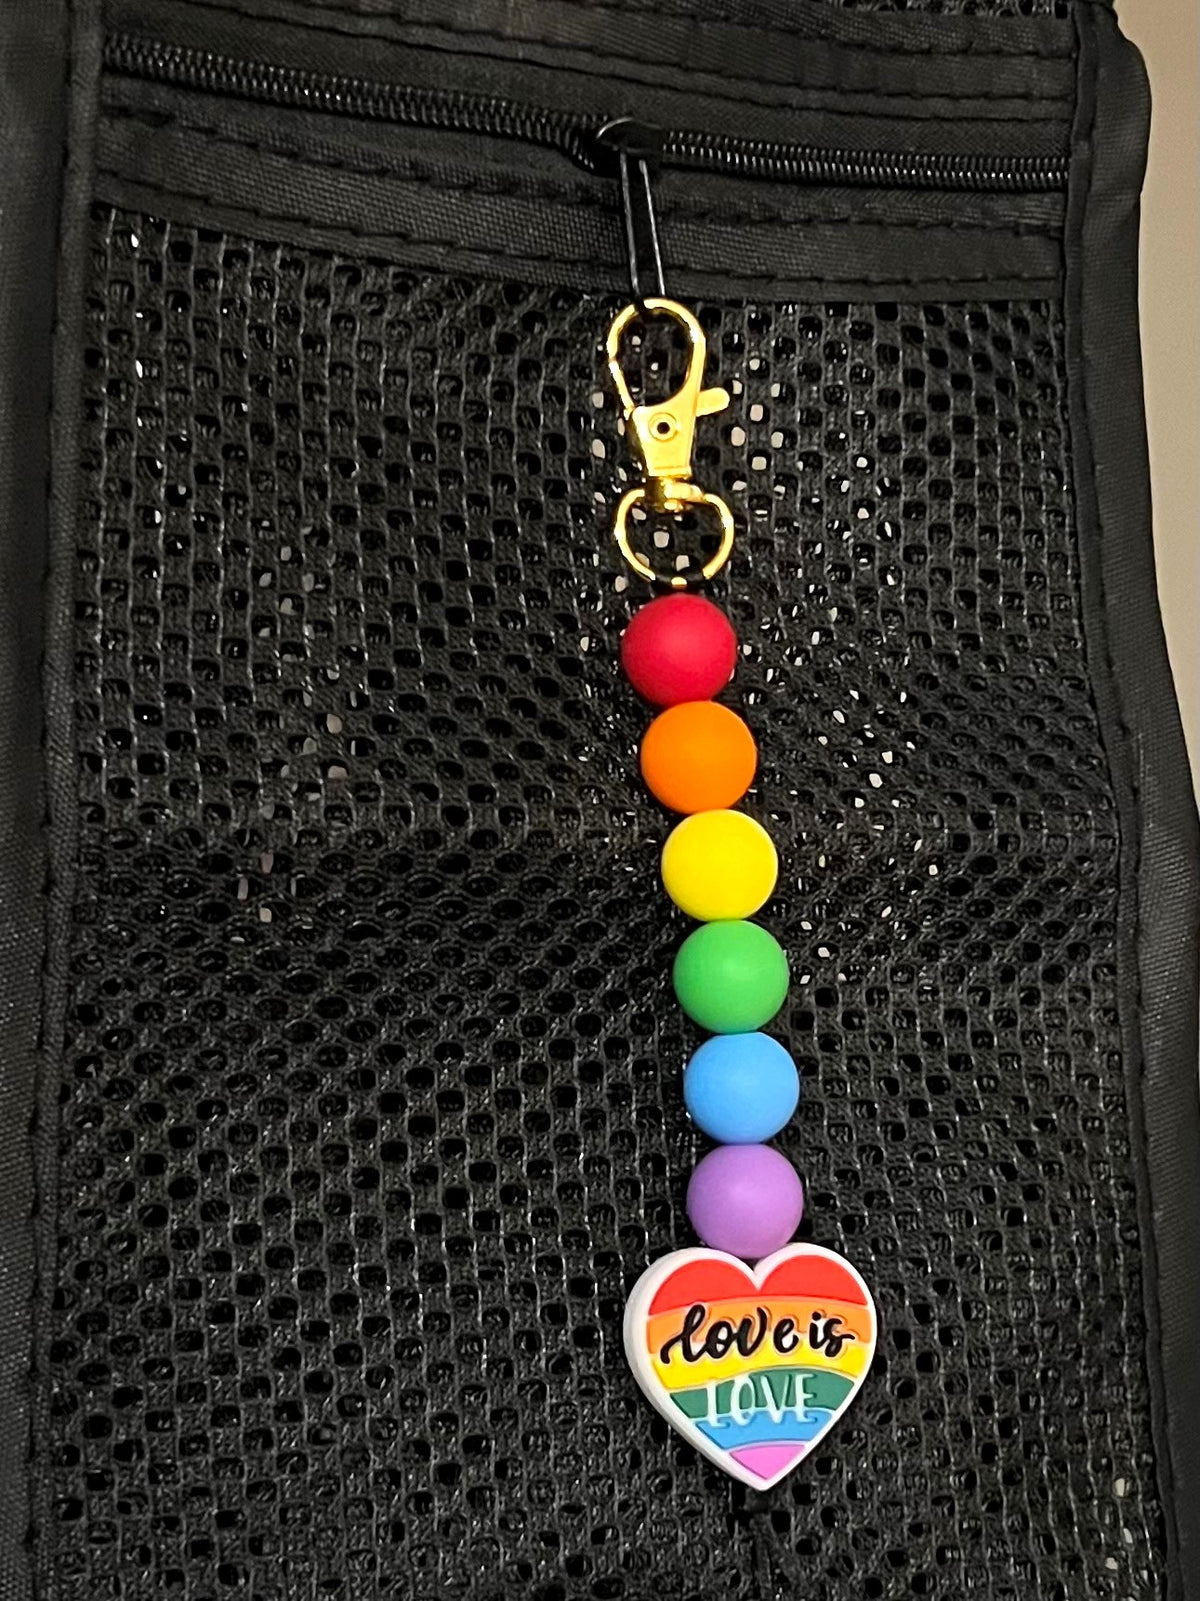 Fishnet Bag with a Love is Love Rainbow Heart Silicone Bead Charm Dangle clipped to the zipper